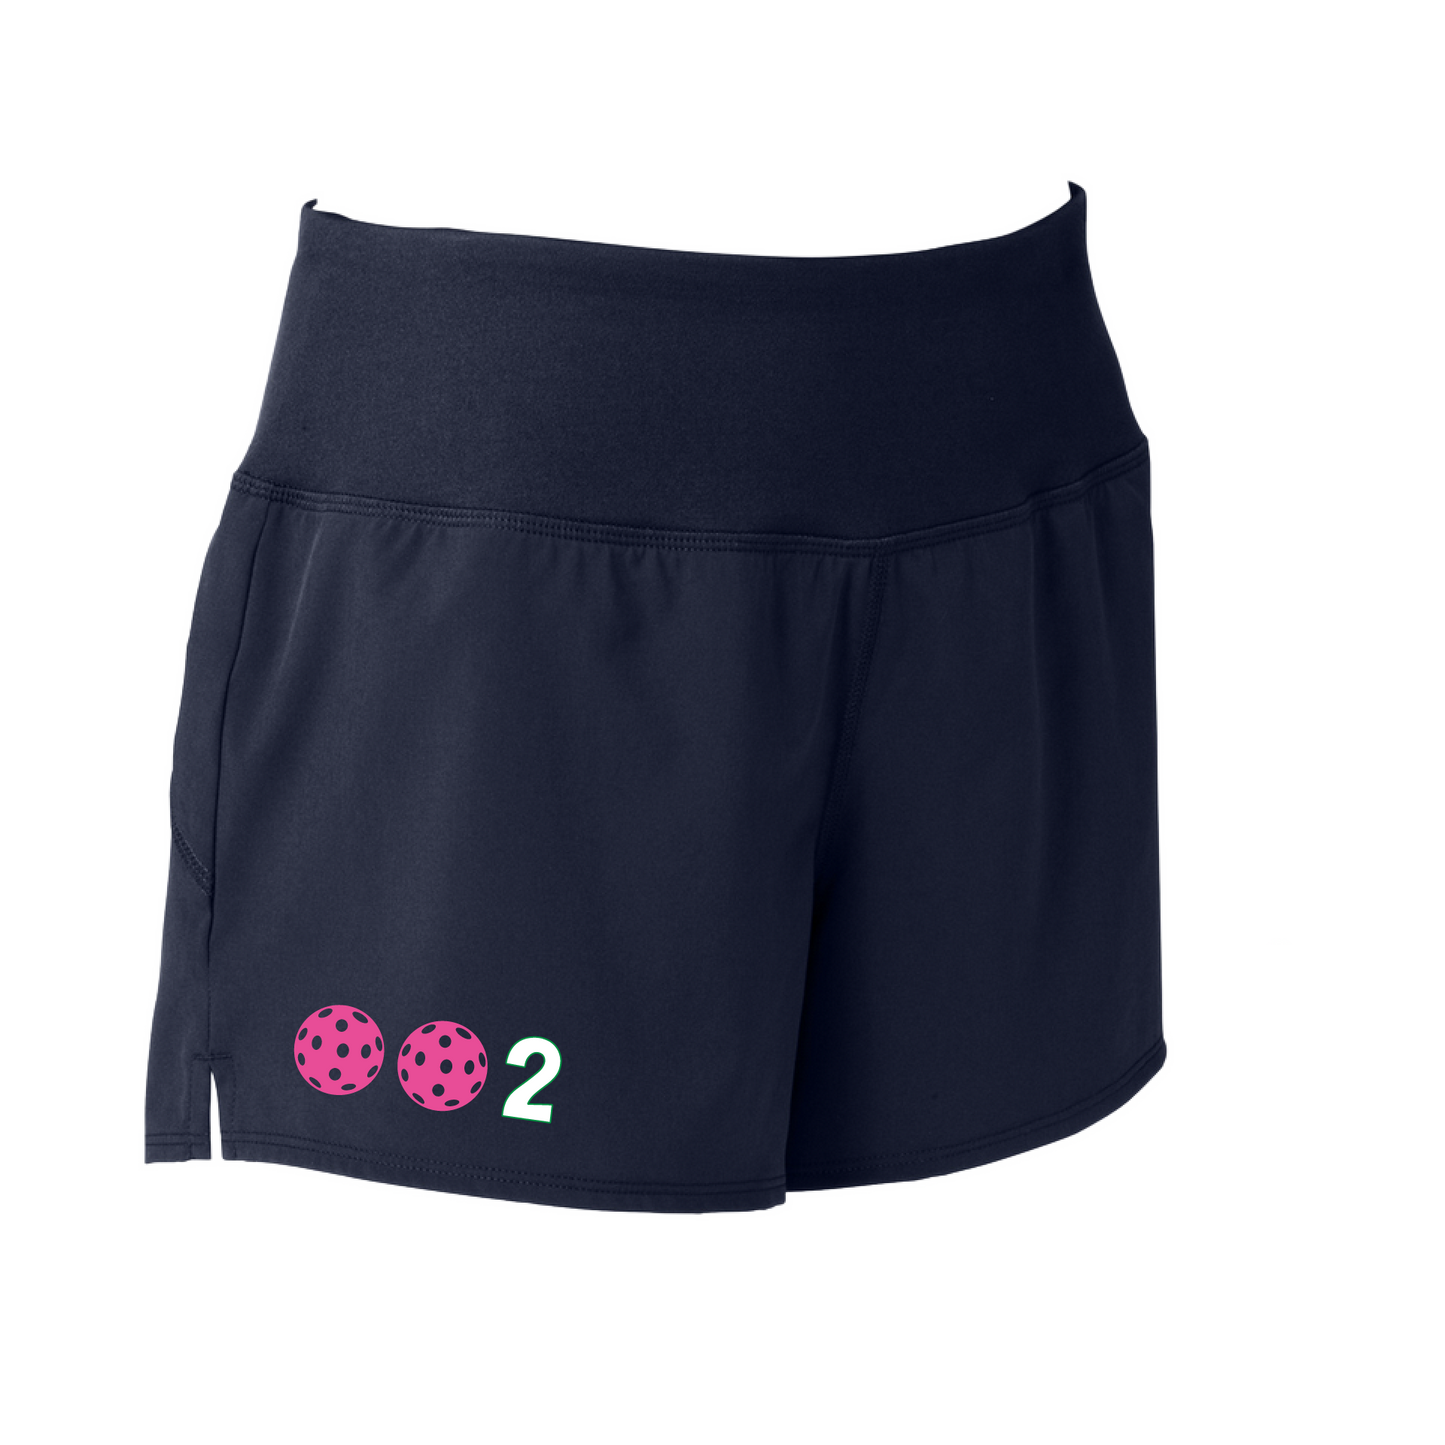 Designs: 002 with customizable Pickleballs (Yellow, White, Pink, Green).  Sport Tek women’s repeat shorts come with built-in cell phone pocket on the exterior of the waistband. You can also feel secure knowing that no matter how strenuous the exercise, the shorts will remain in place (it won’t ride up!). These shorts are extremely versatile and trendy. Transition from the Pickleball court to running errands smoothly